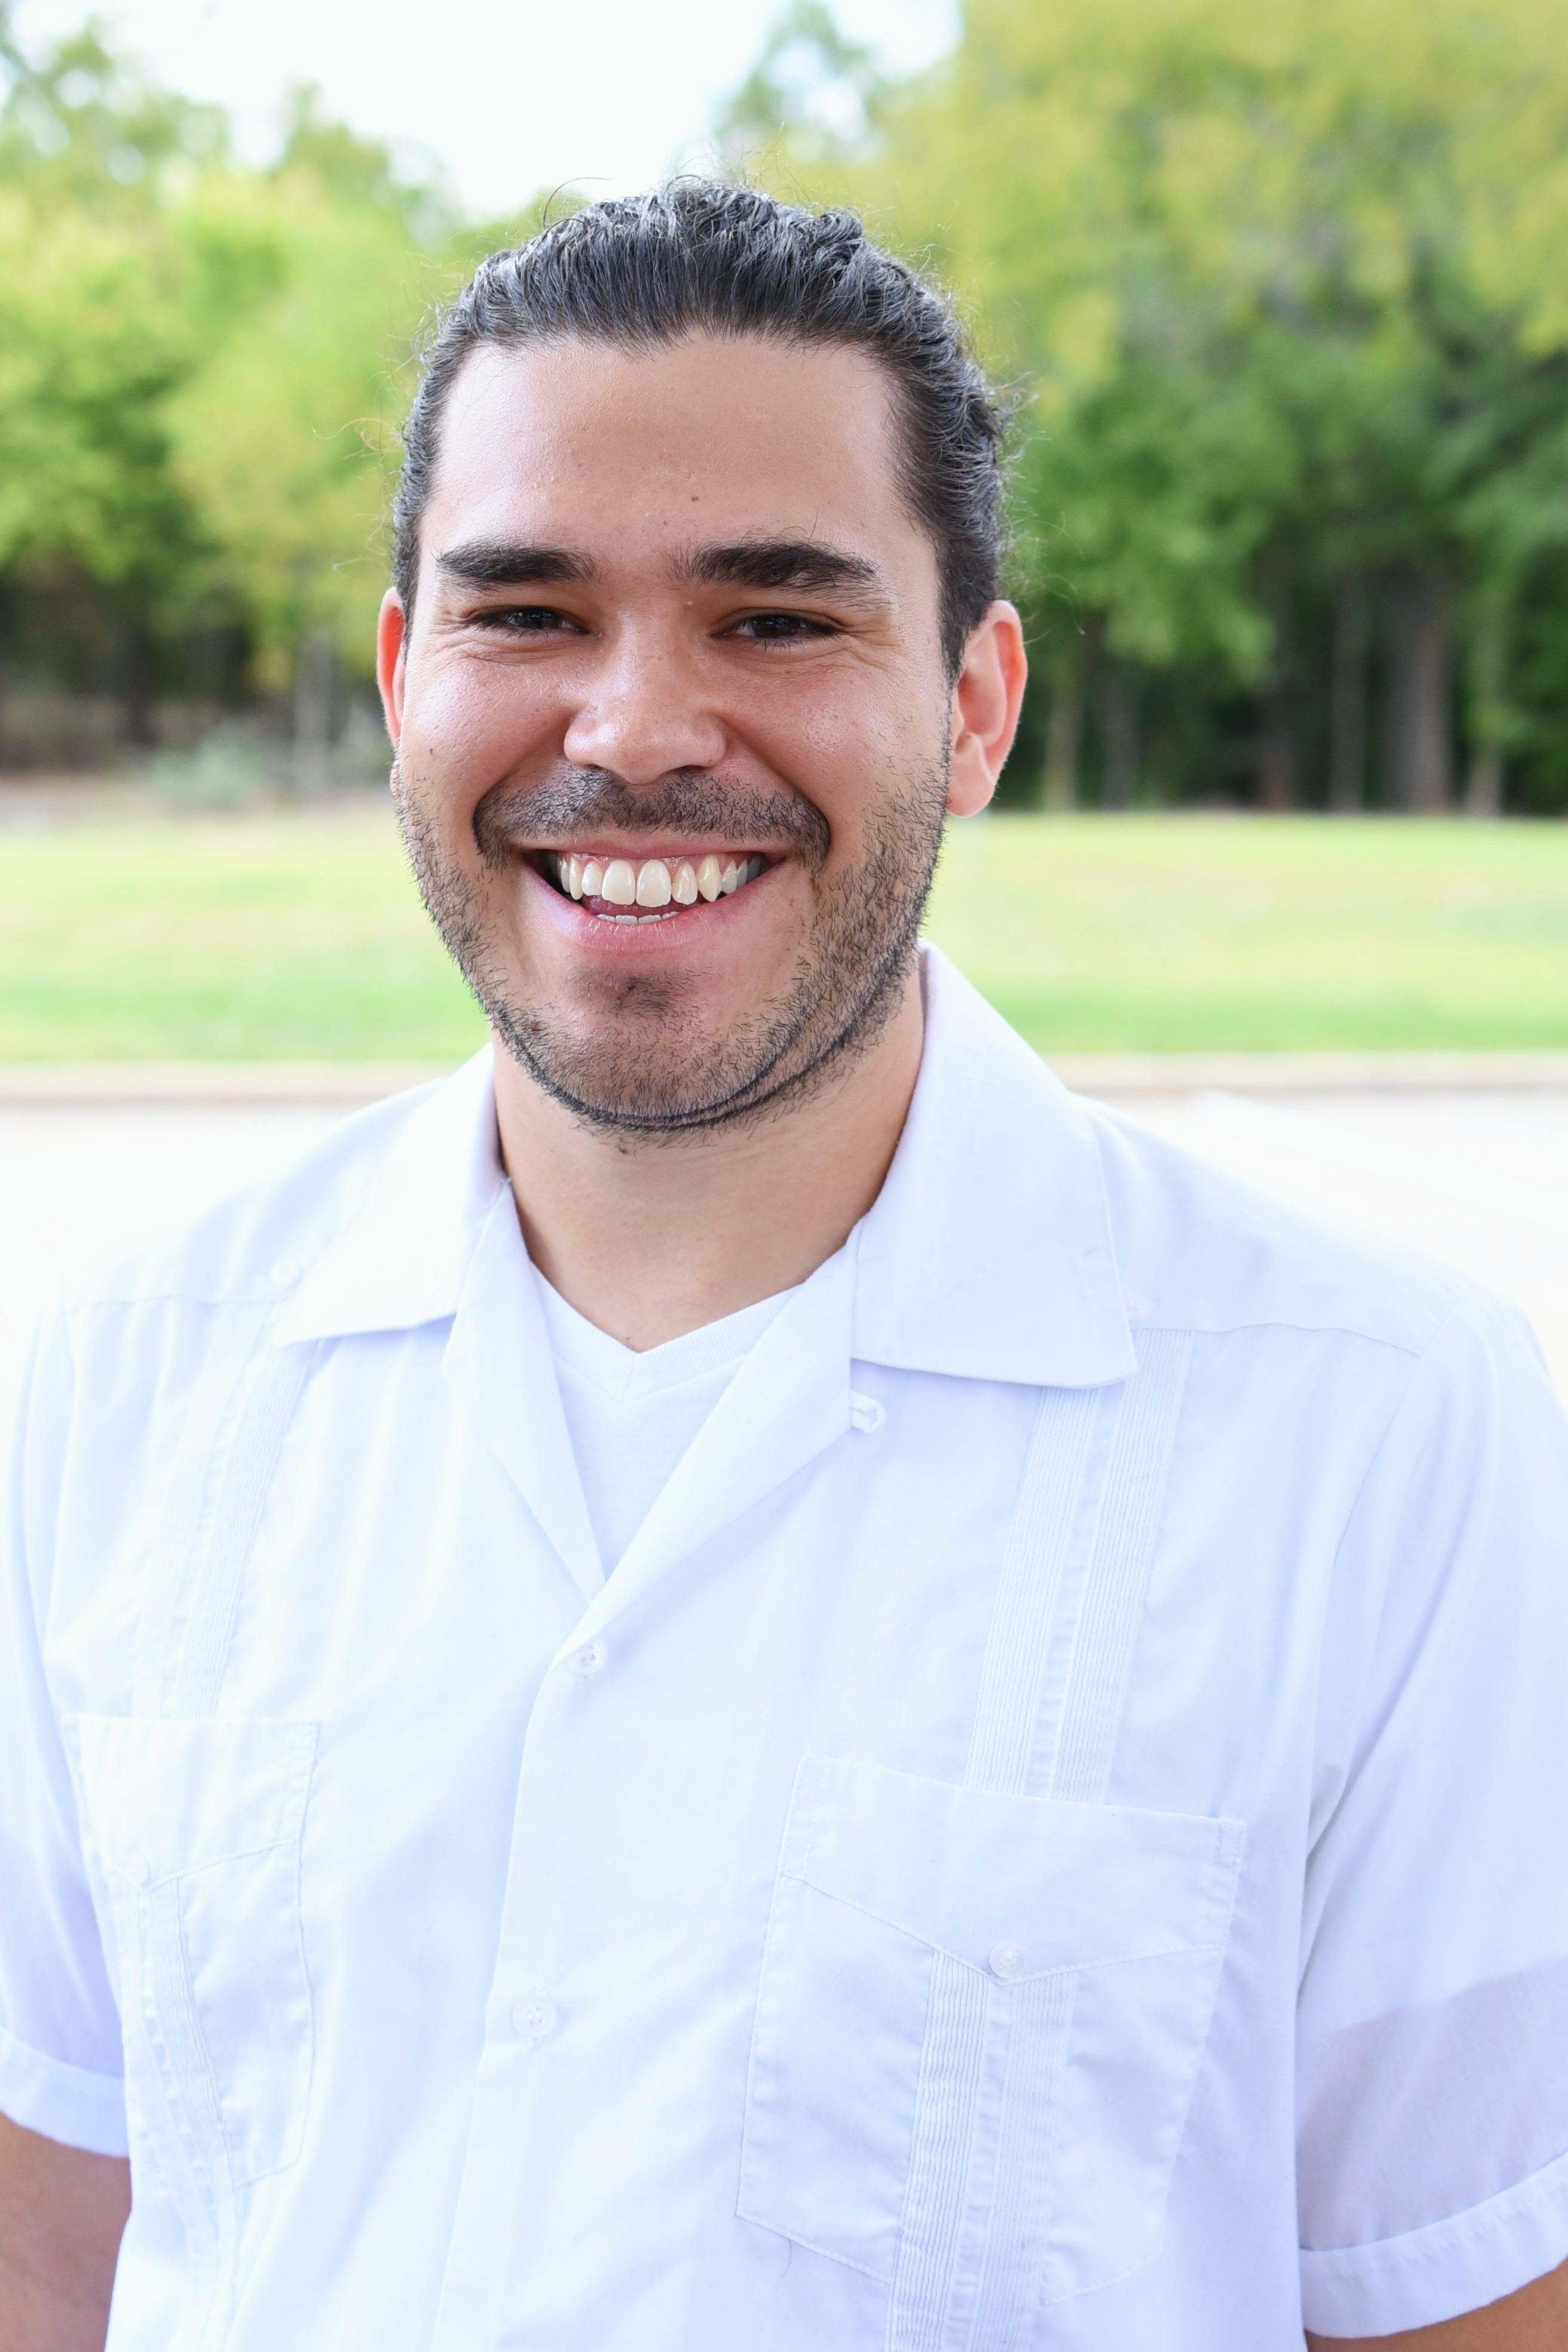 A profile photo of Mateo Clarke. Mateo is a person with dark brown hair pulled back behind his head. He is wearing a white collared, short-sleeve shirt and is standing in front of green trees and grass.